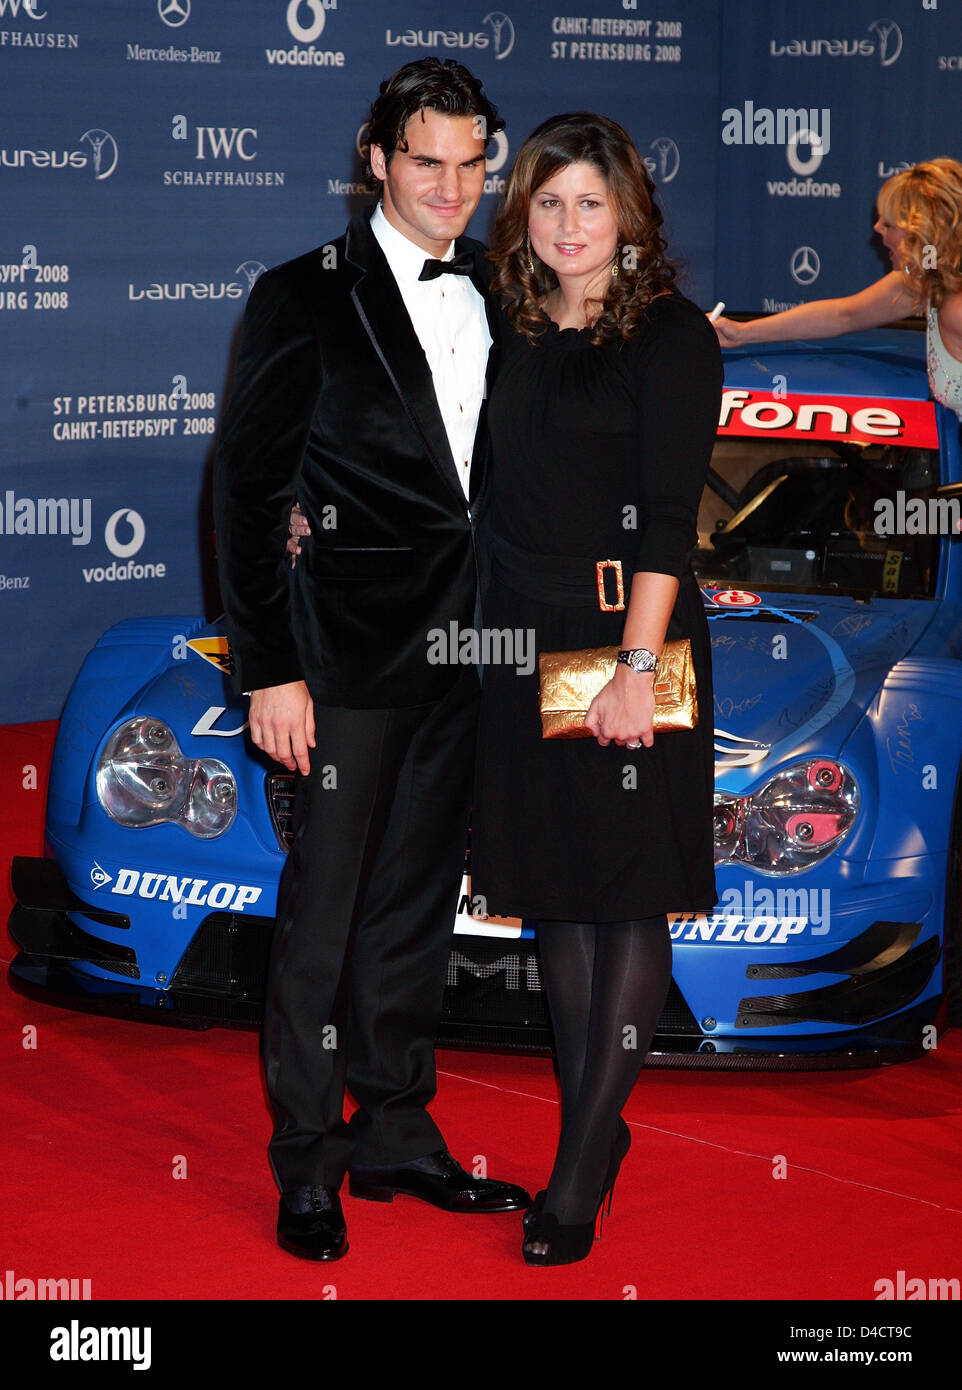 Swiss tennis champion Roger Federer (L) and his girlfriend Mirka Vavrinec (R) pose on the red carpet as they arrive for the 'Laureus World Sports Awards' in Saint Petersburg, Russian Federation, 17 February 2008. Outstanding athletes, who had been selected by a jury comprised of former top athletes, were awarded the Laureus Sports Award on 18 February. Photo: GERO BRELOER Stock Photo